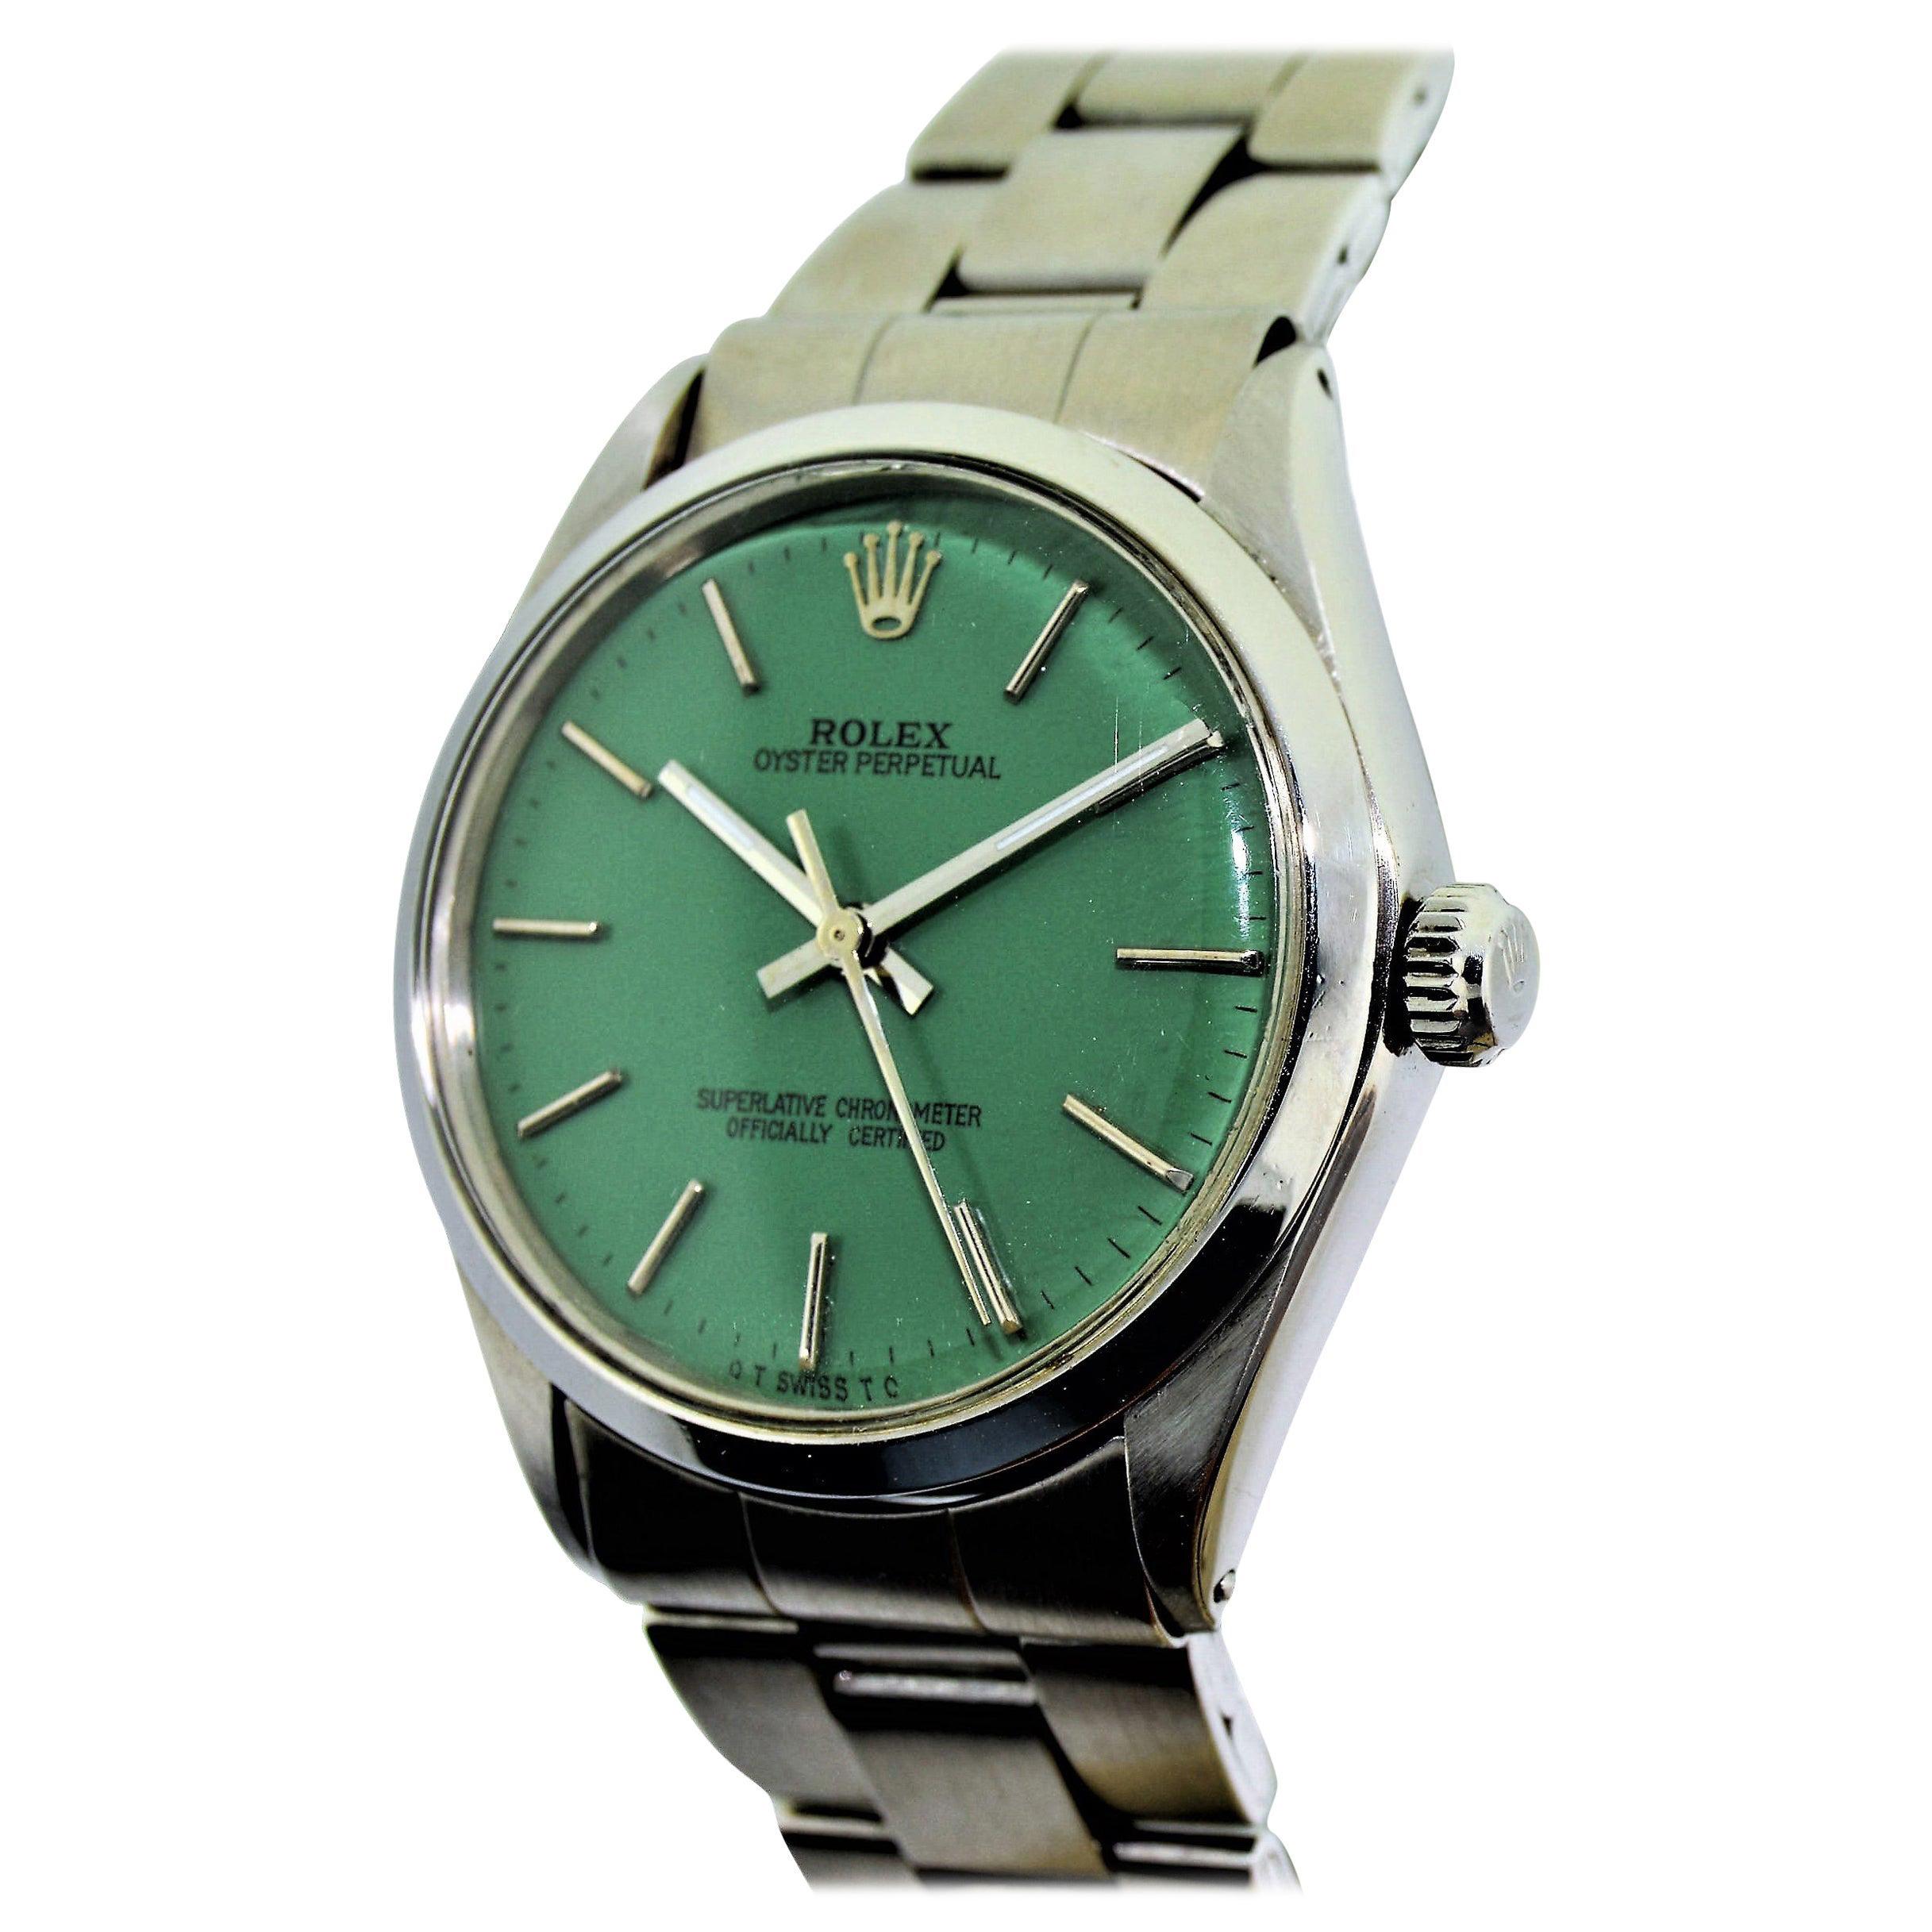 Rolex Stainless Steel Oyster Perpetual Custom Dial Wristwatch, circa 1970s